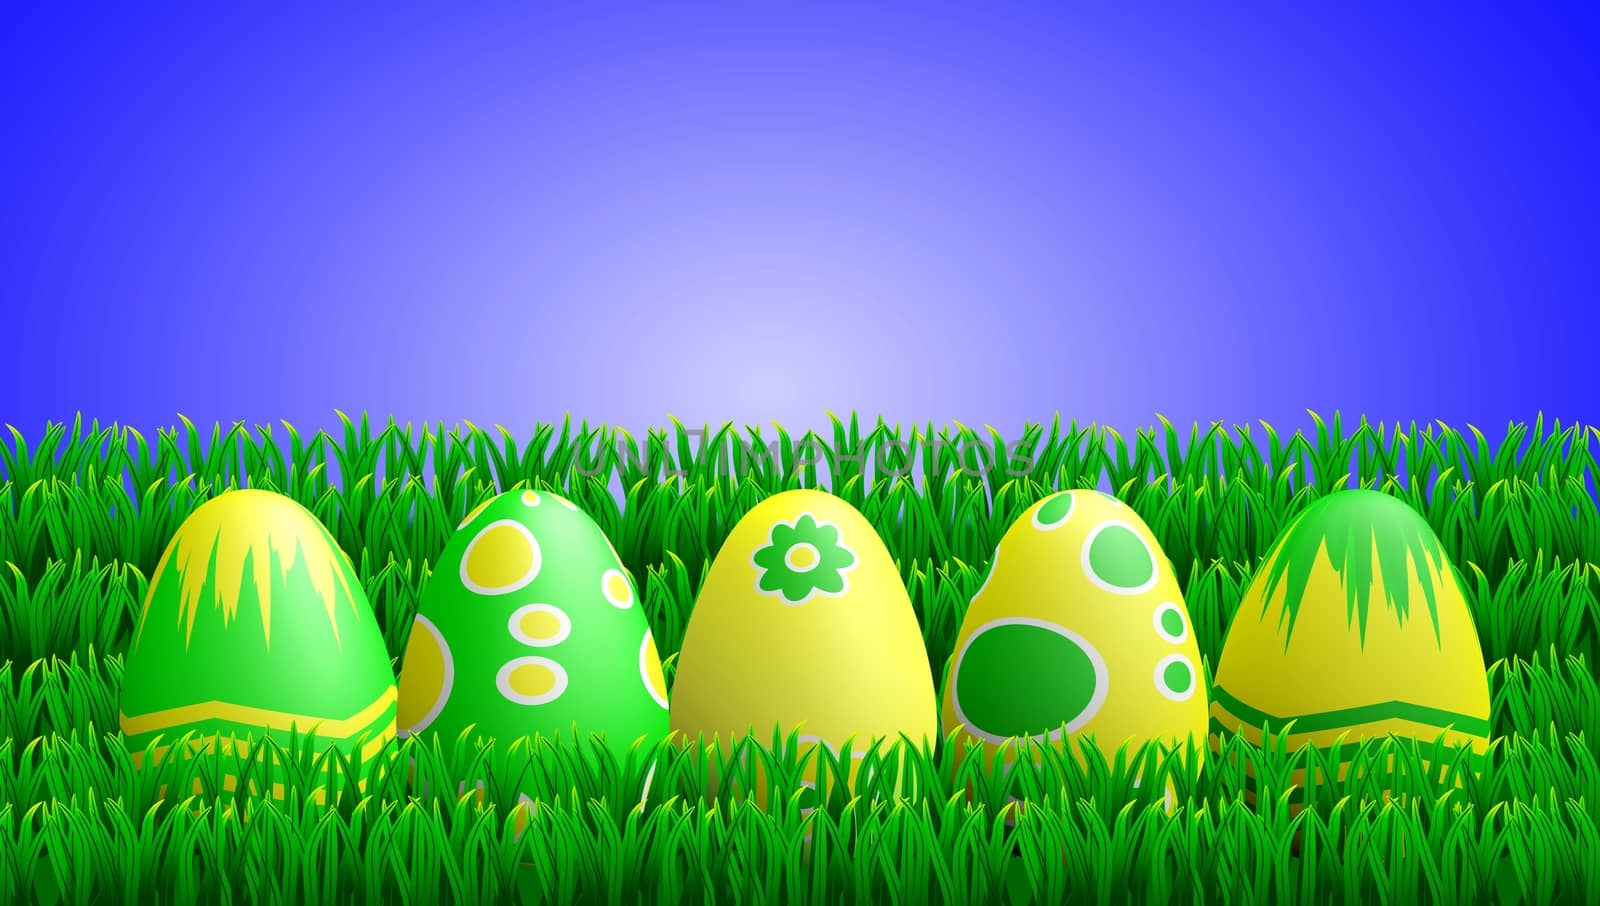 Yellow Green Easter Eggs in Grass by RichieThakur